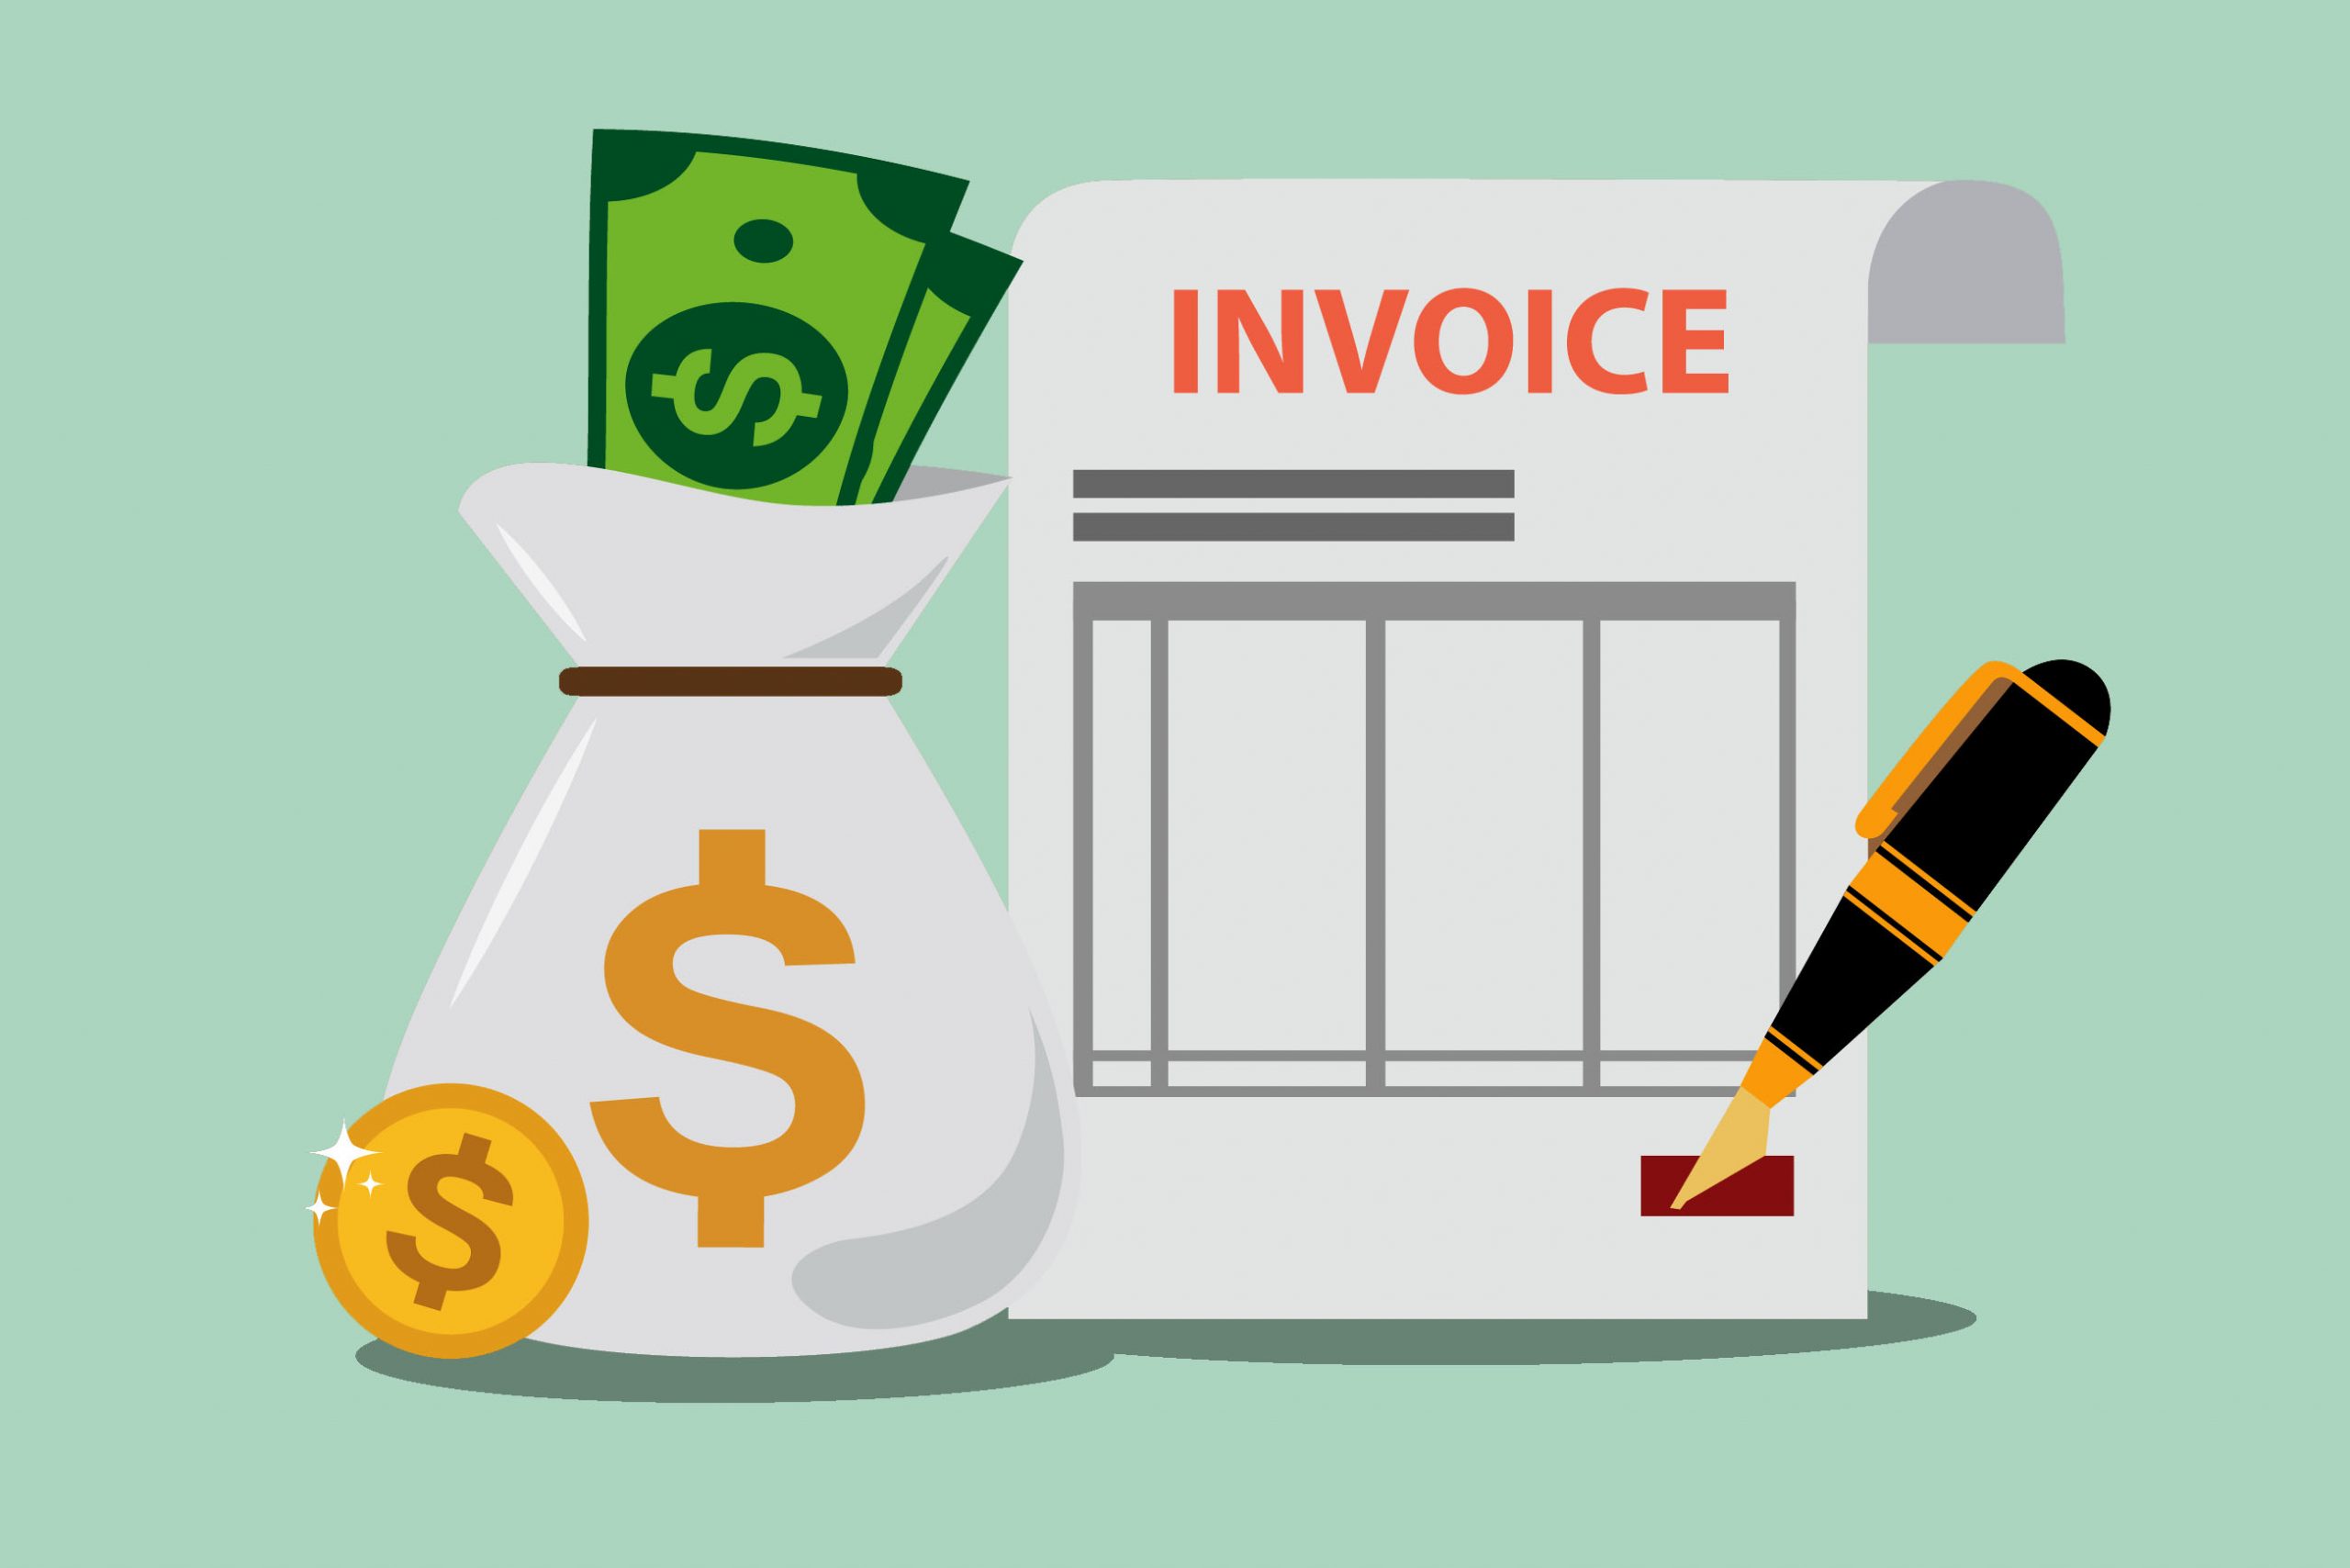 Business financing option - Invoice financing and invoice factoring